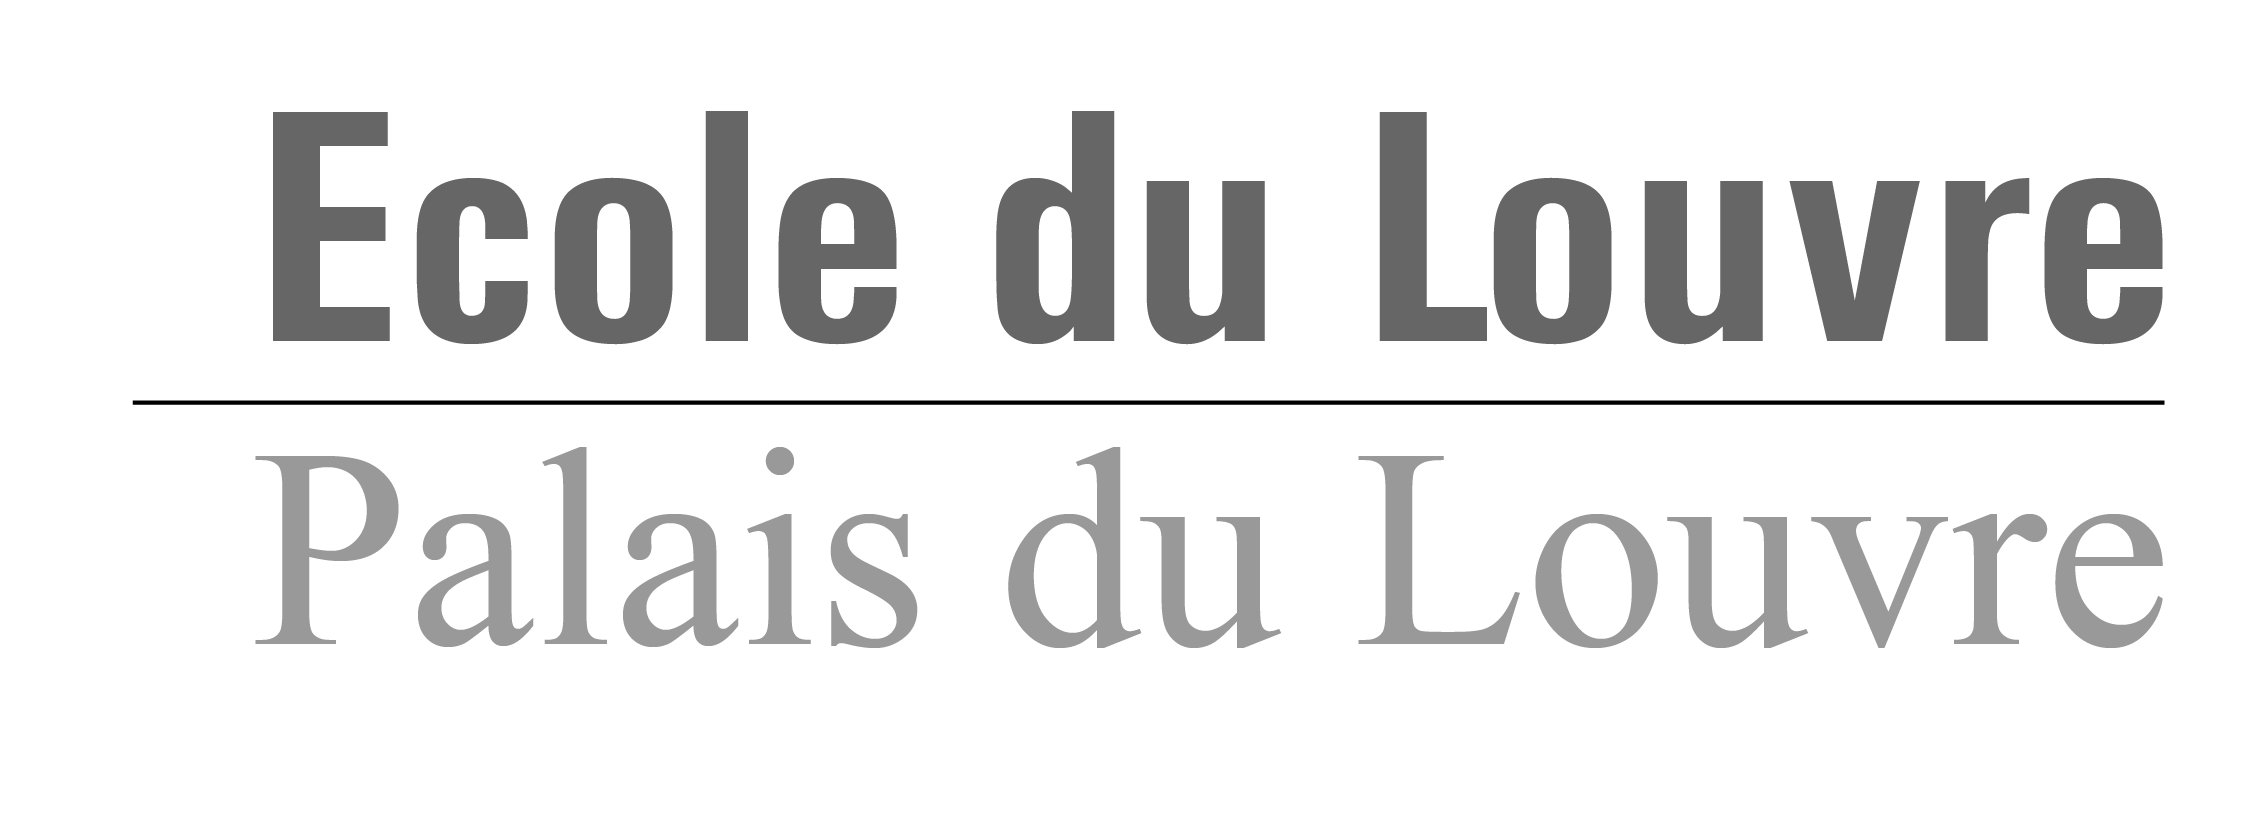 The Louvre Logo - File:LogoVertical.png - Wikimedia Commons